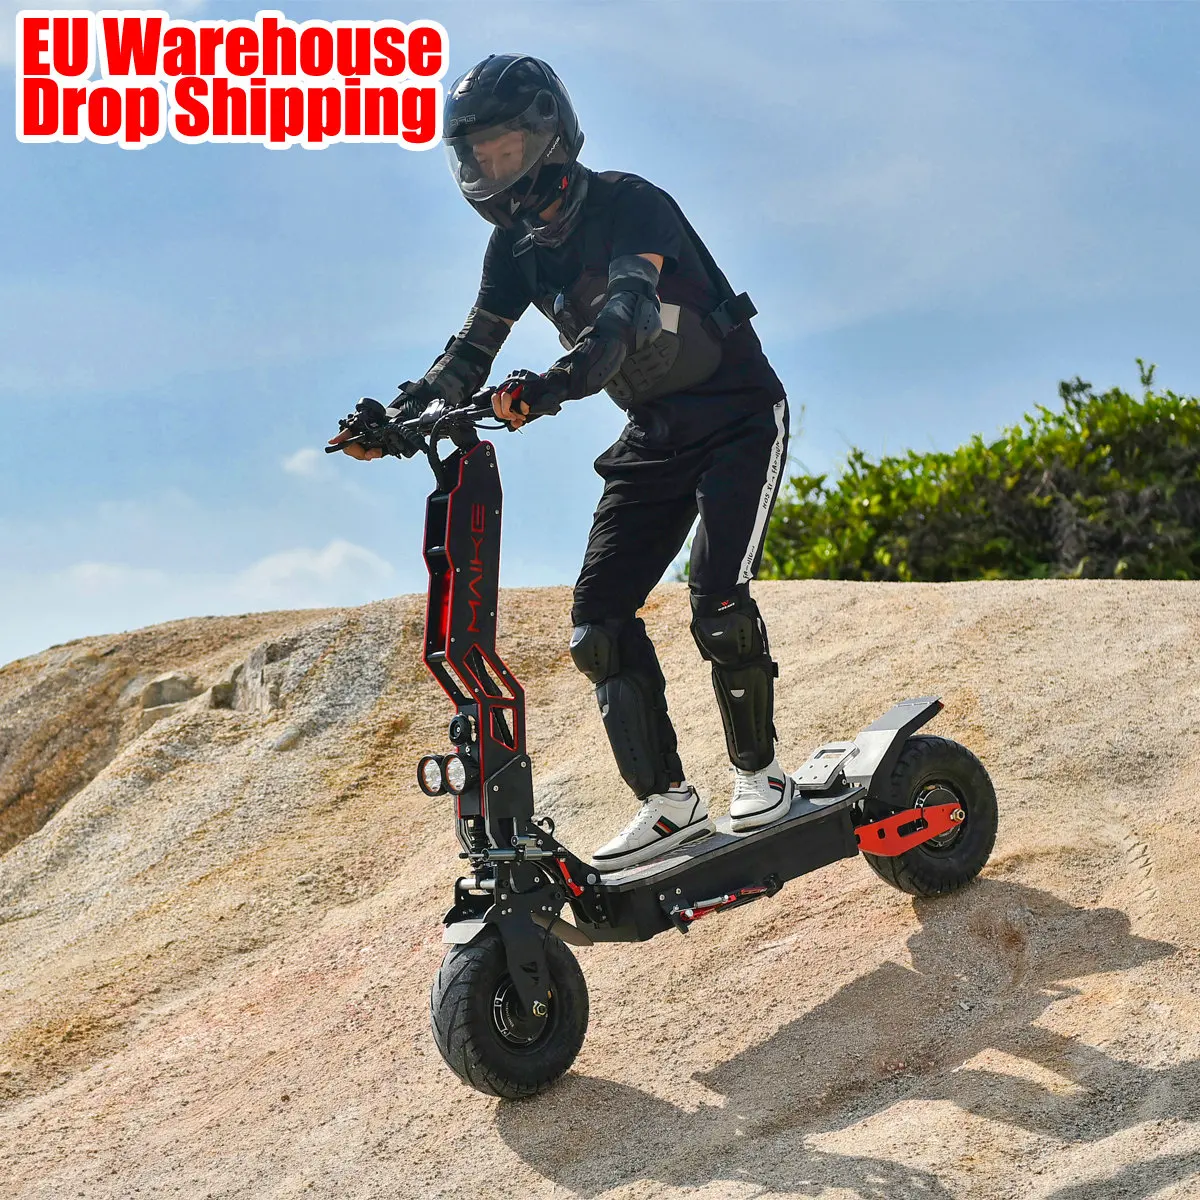 

Free Shipping Maike MKS dual scooter EU warehouse e scooter 13 inch wide wheel electric motorcycle 8000w